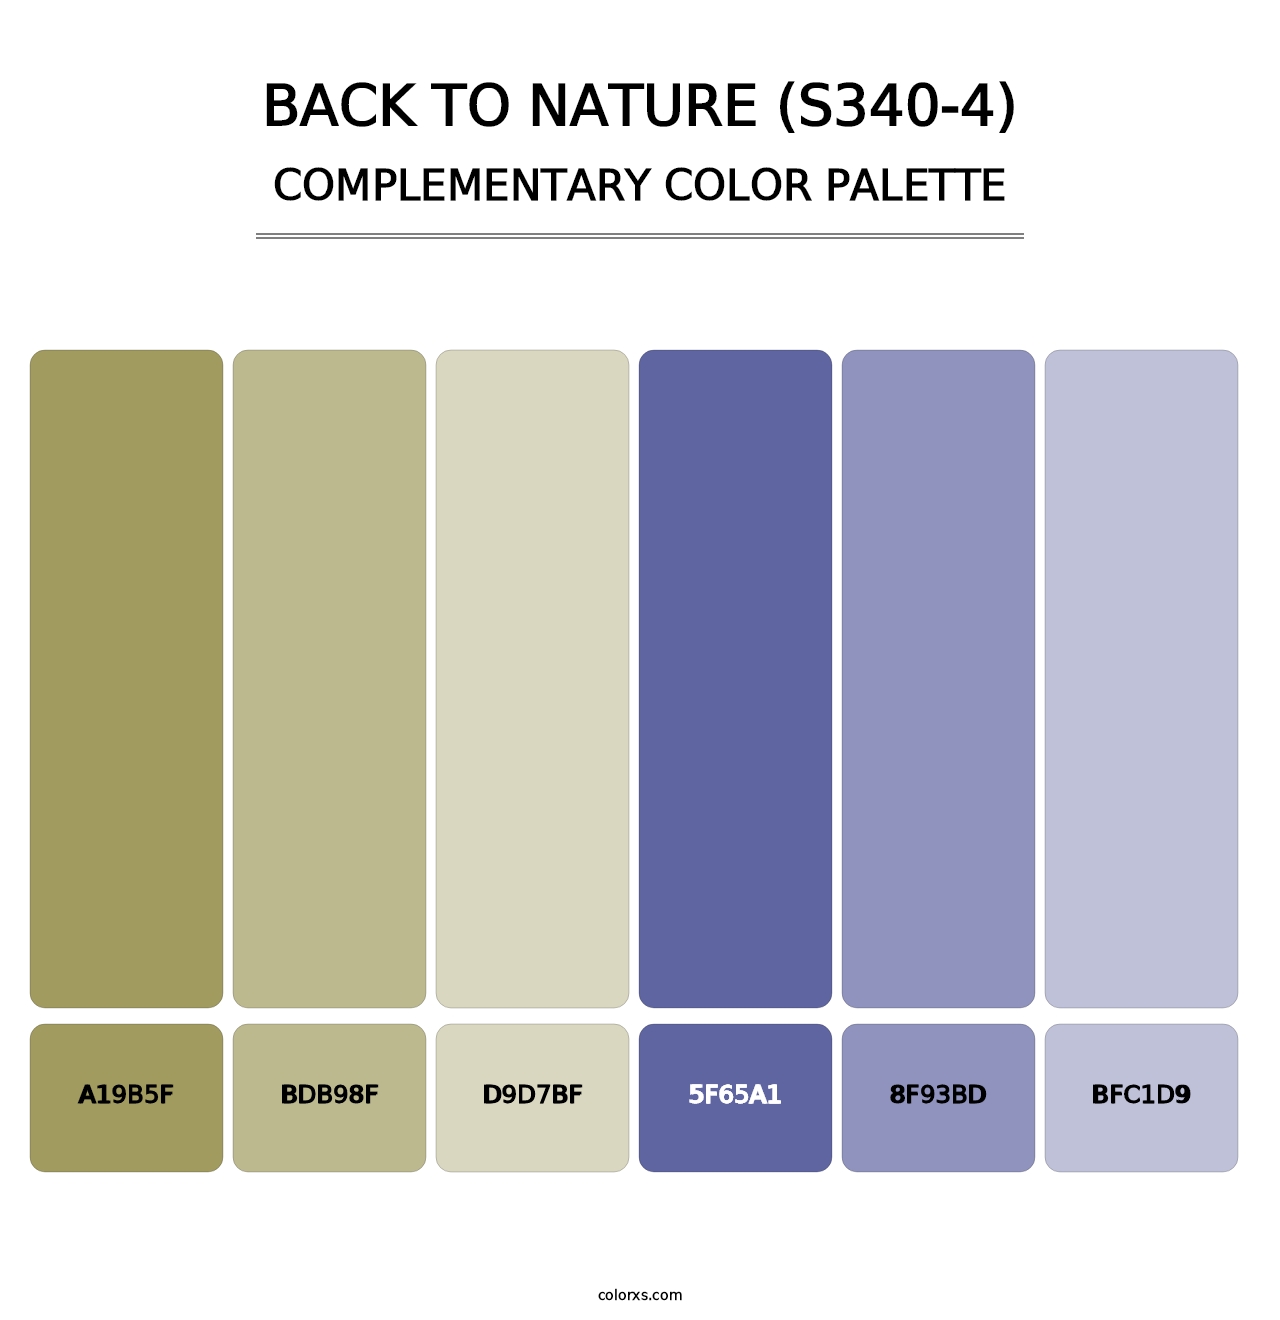 Back To Nature (S340-4) - Complementary Color Palette